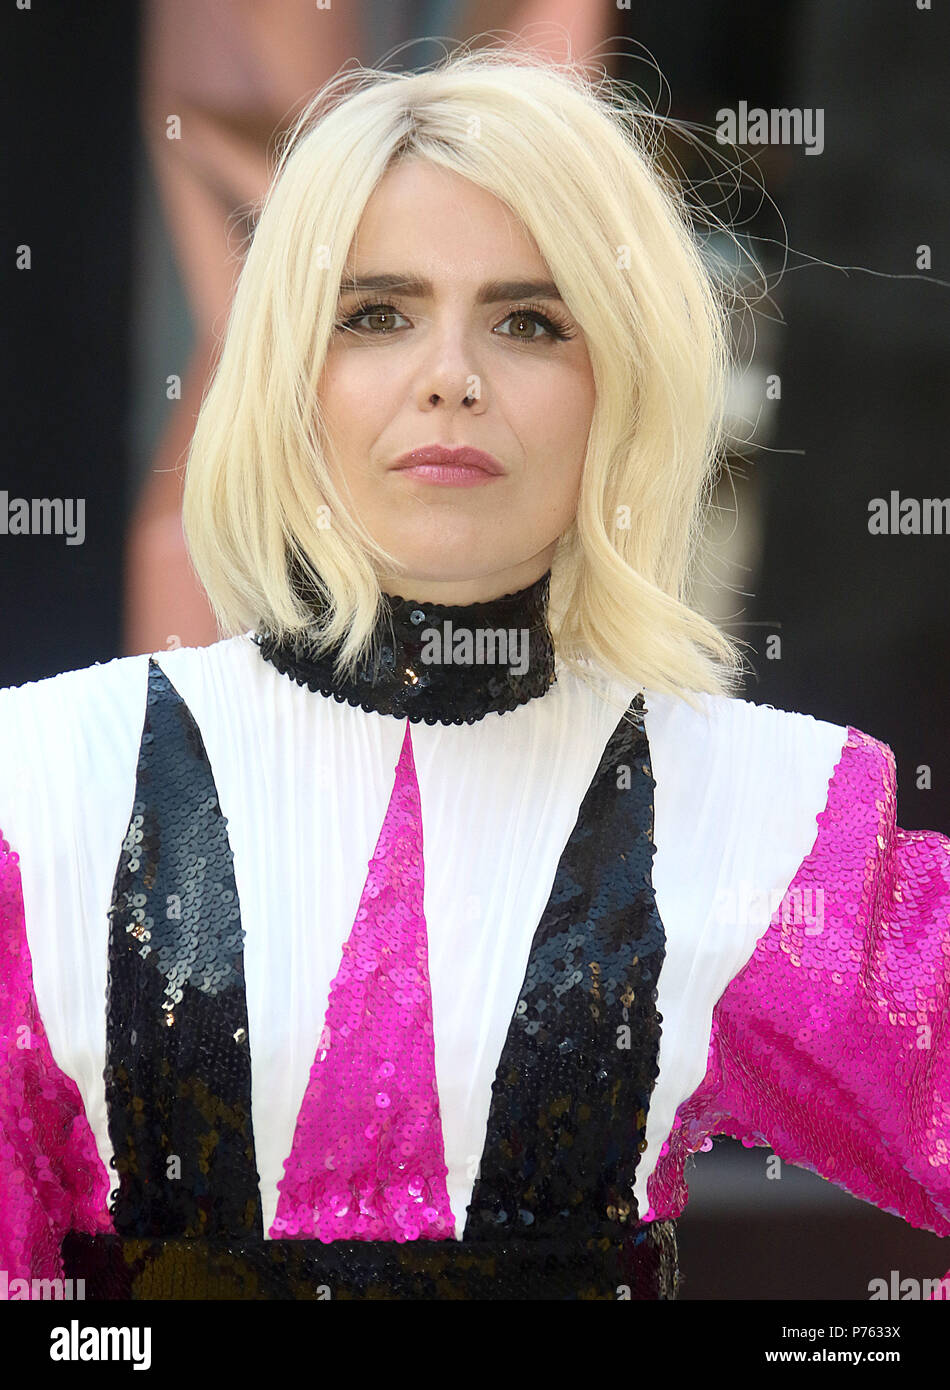 Jun 06, 2018 - Paloma Faith attending Royal Academy Of Arts 250th Summer Exhibition Preview Party at Burlington House in London, England, UK Stock Photo